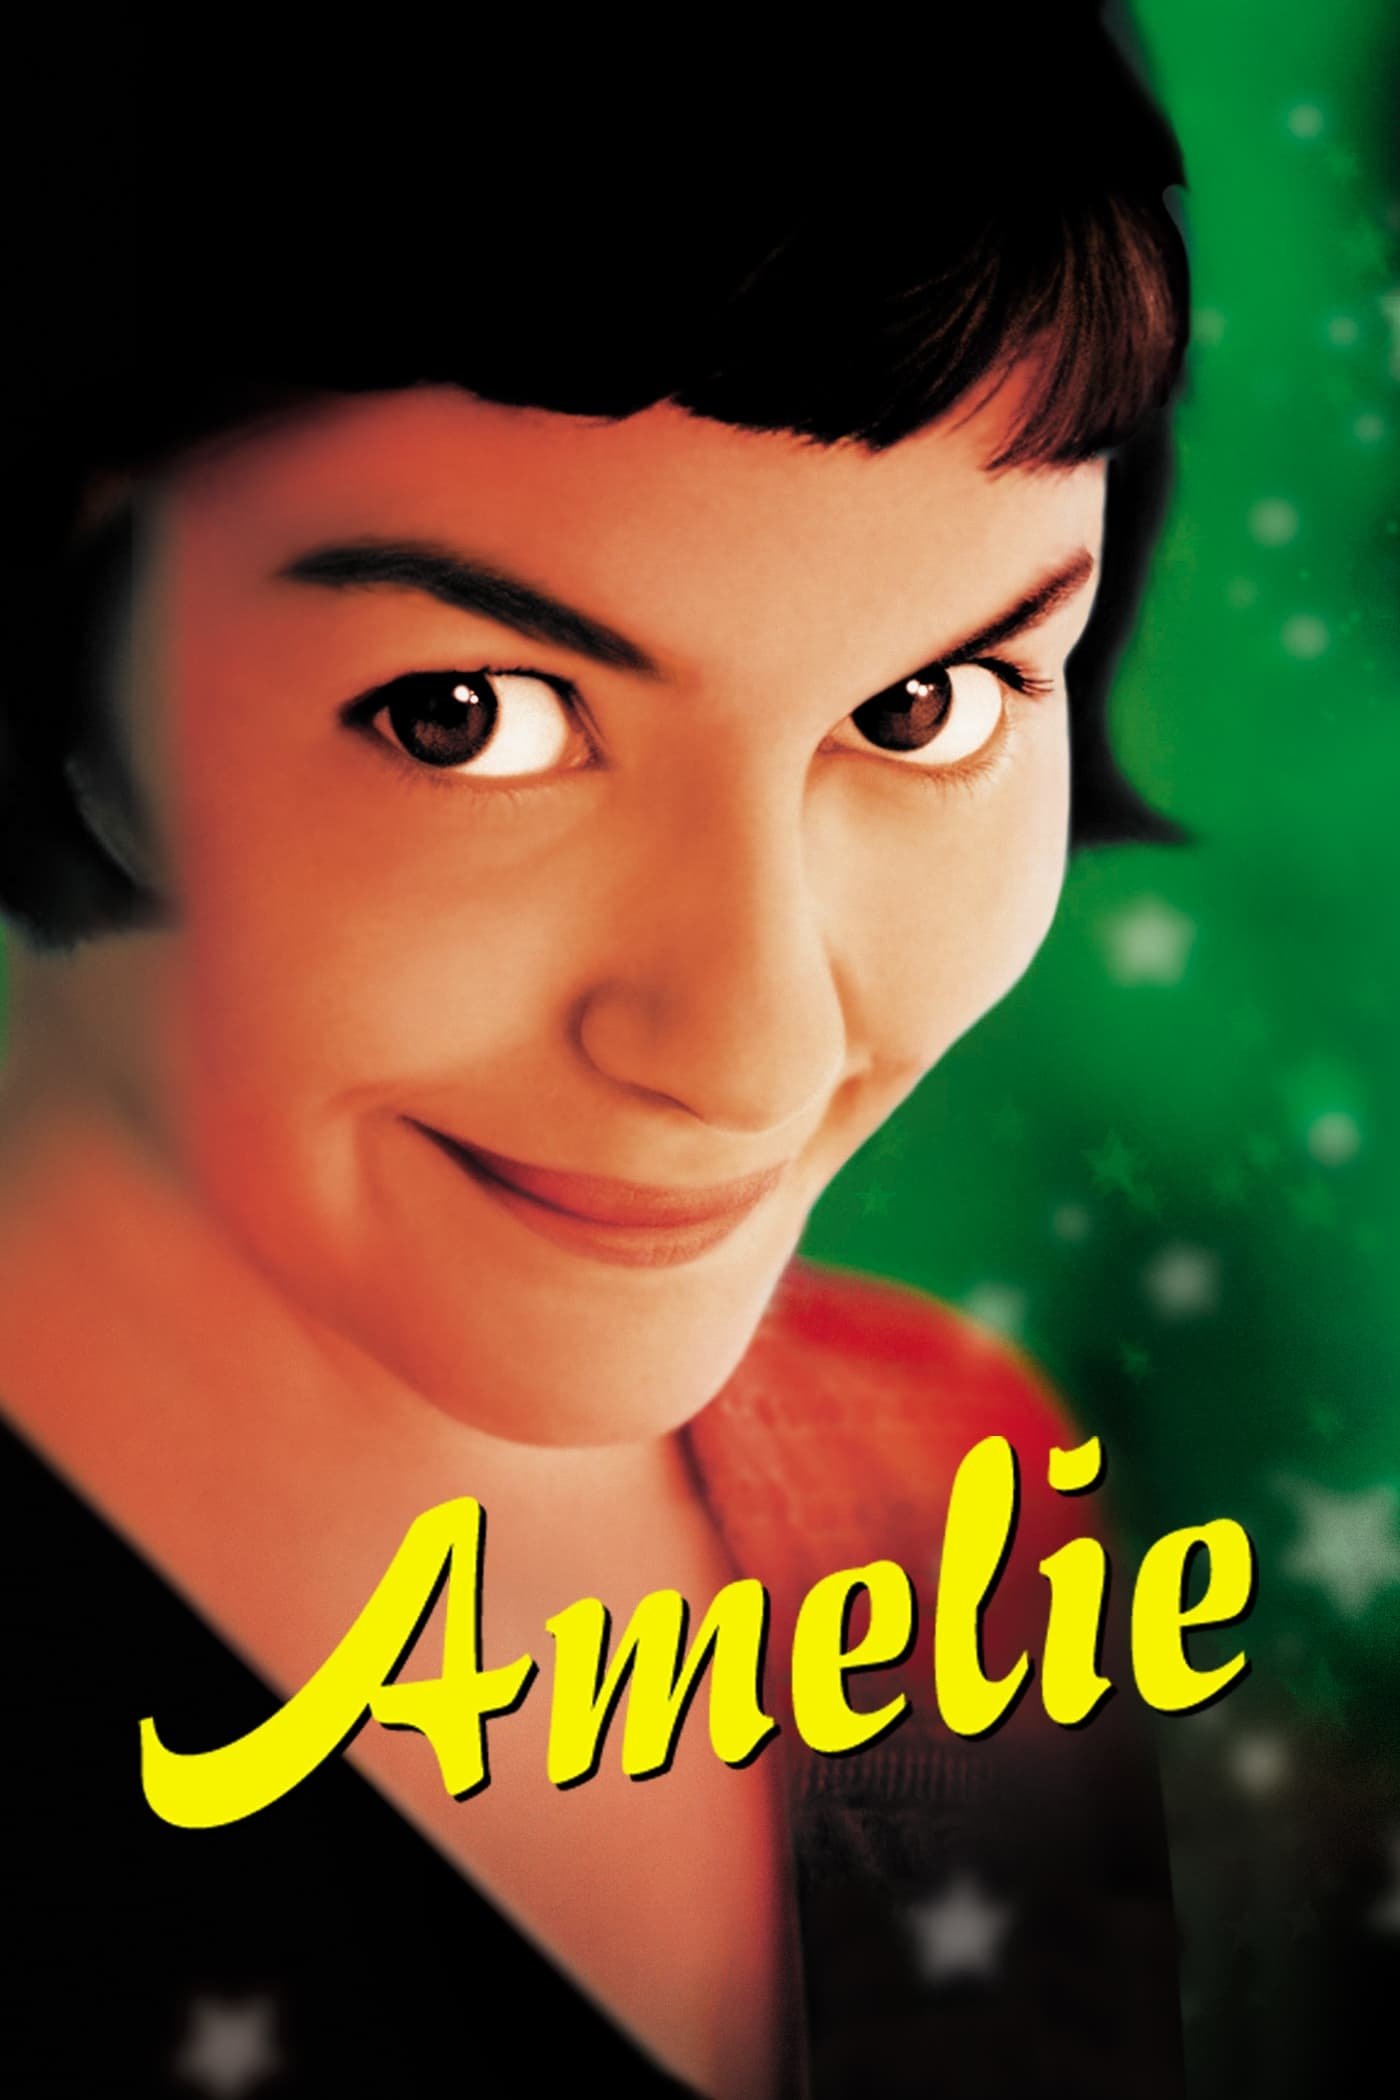 amelie trailer with english subtitles